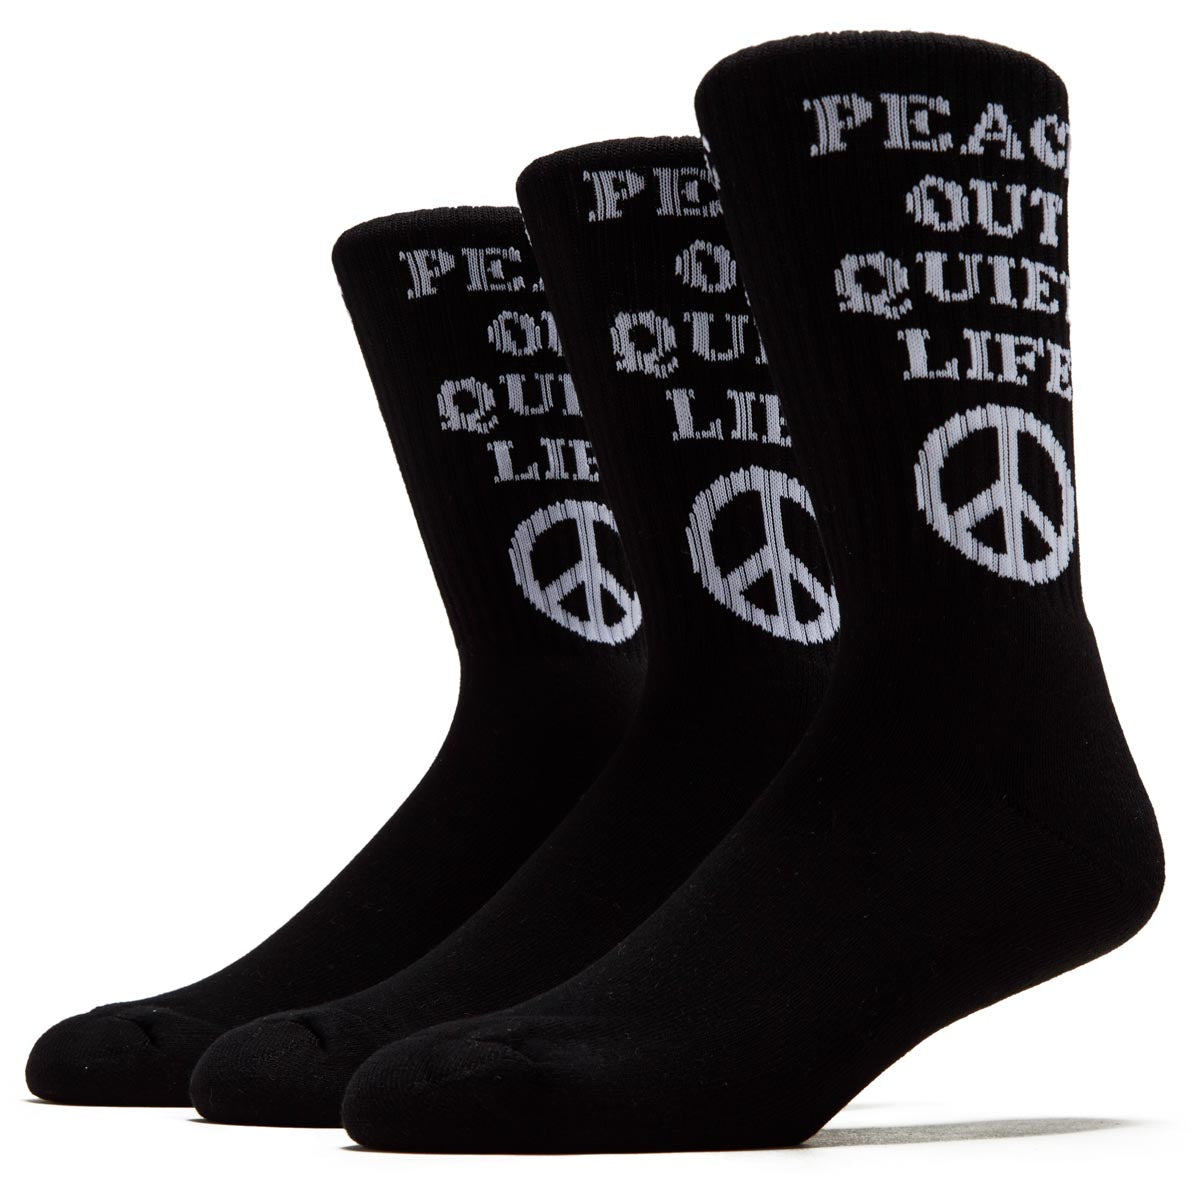 The Quiet Life Peace Out 3 Pairs of Socks - Black image 1